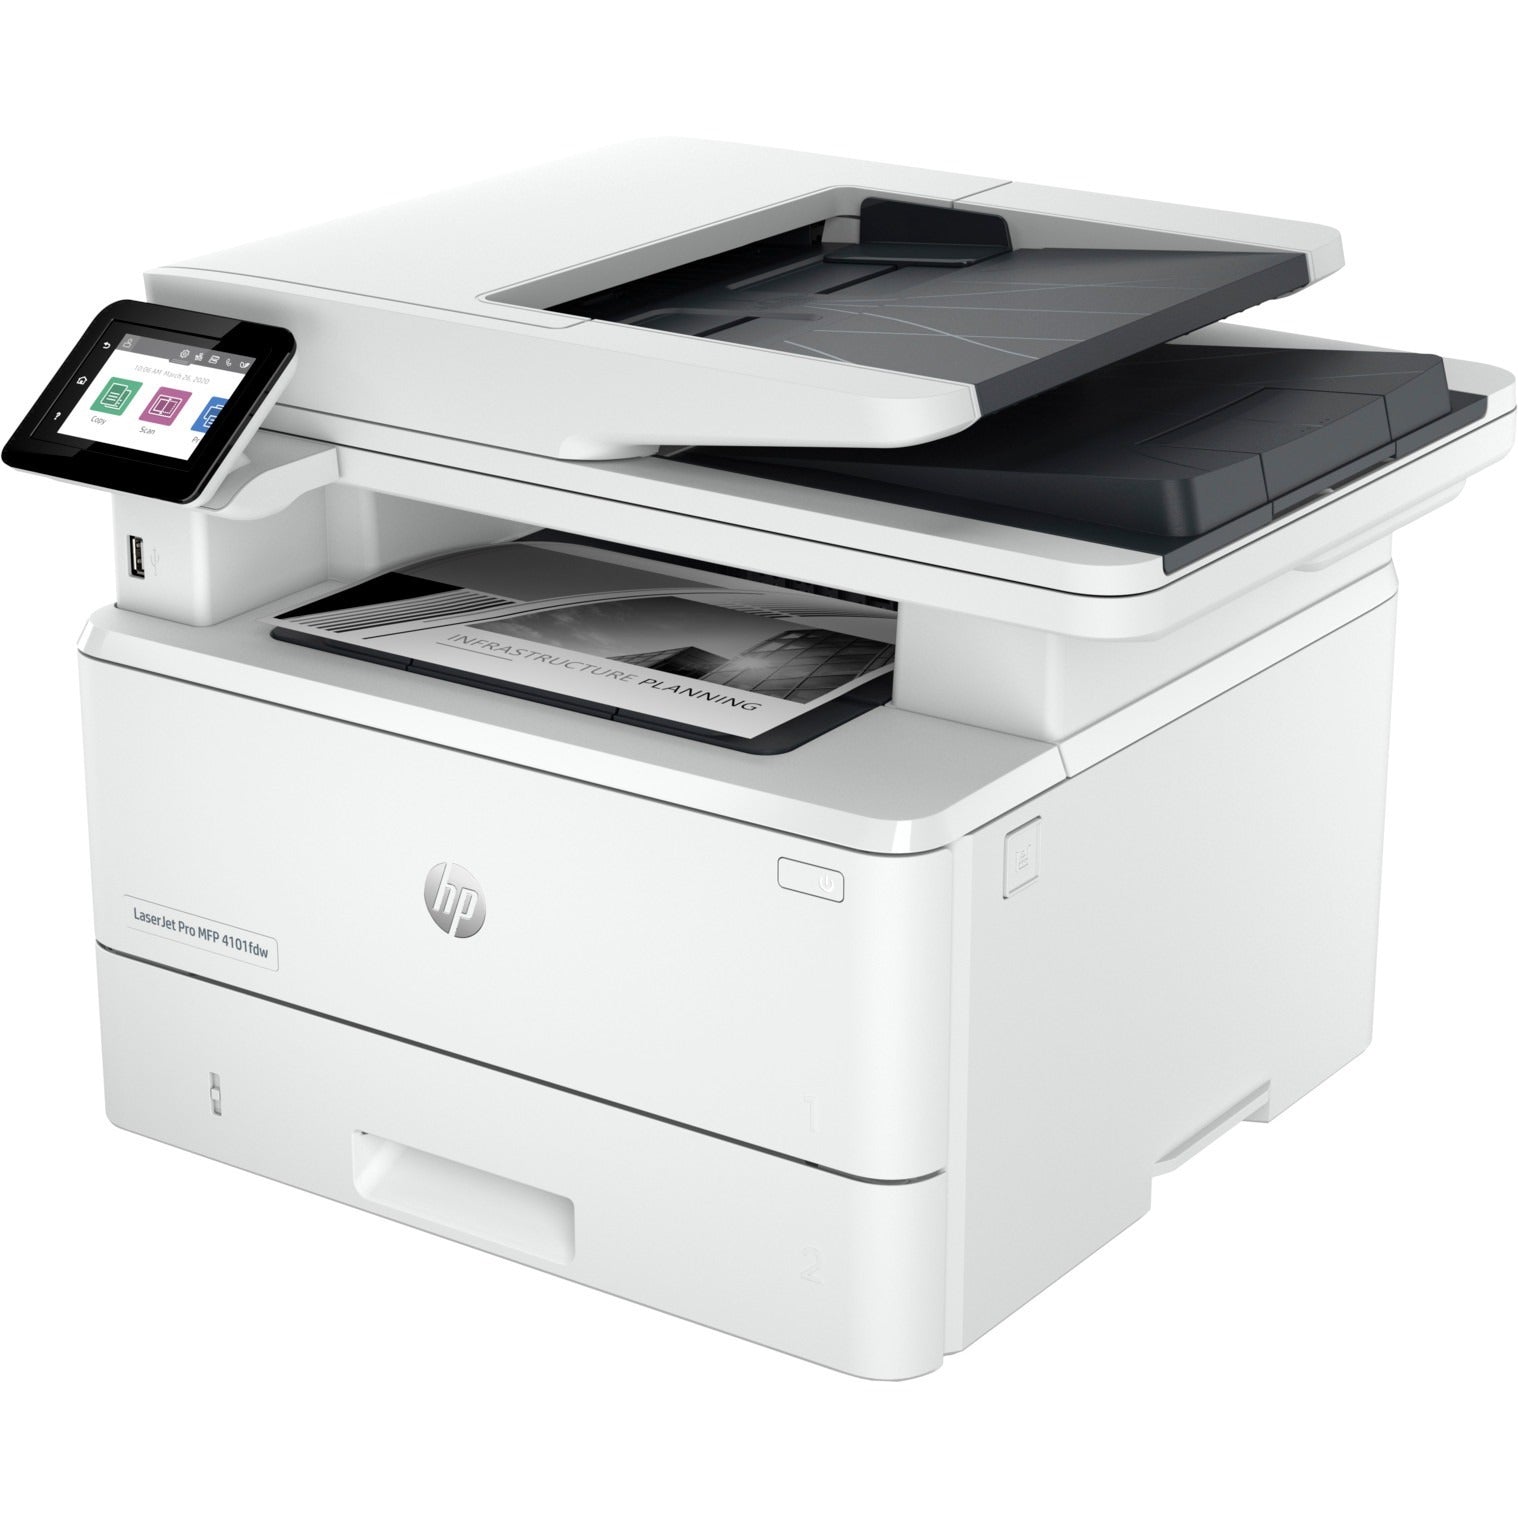 hp-laserjet-pro-4101fdw-wireless-laser-multifunction-printer-monochrome-white-copier-fax-printer-scanner-4800-x-600-dpi-print-automatic-duplex-print-up-to-80000-pages-monthly-color-flatbed-scanner-1200-dpi-optical-scan-monochrome-fa_hew2z619f - 2